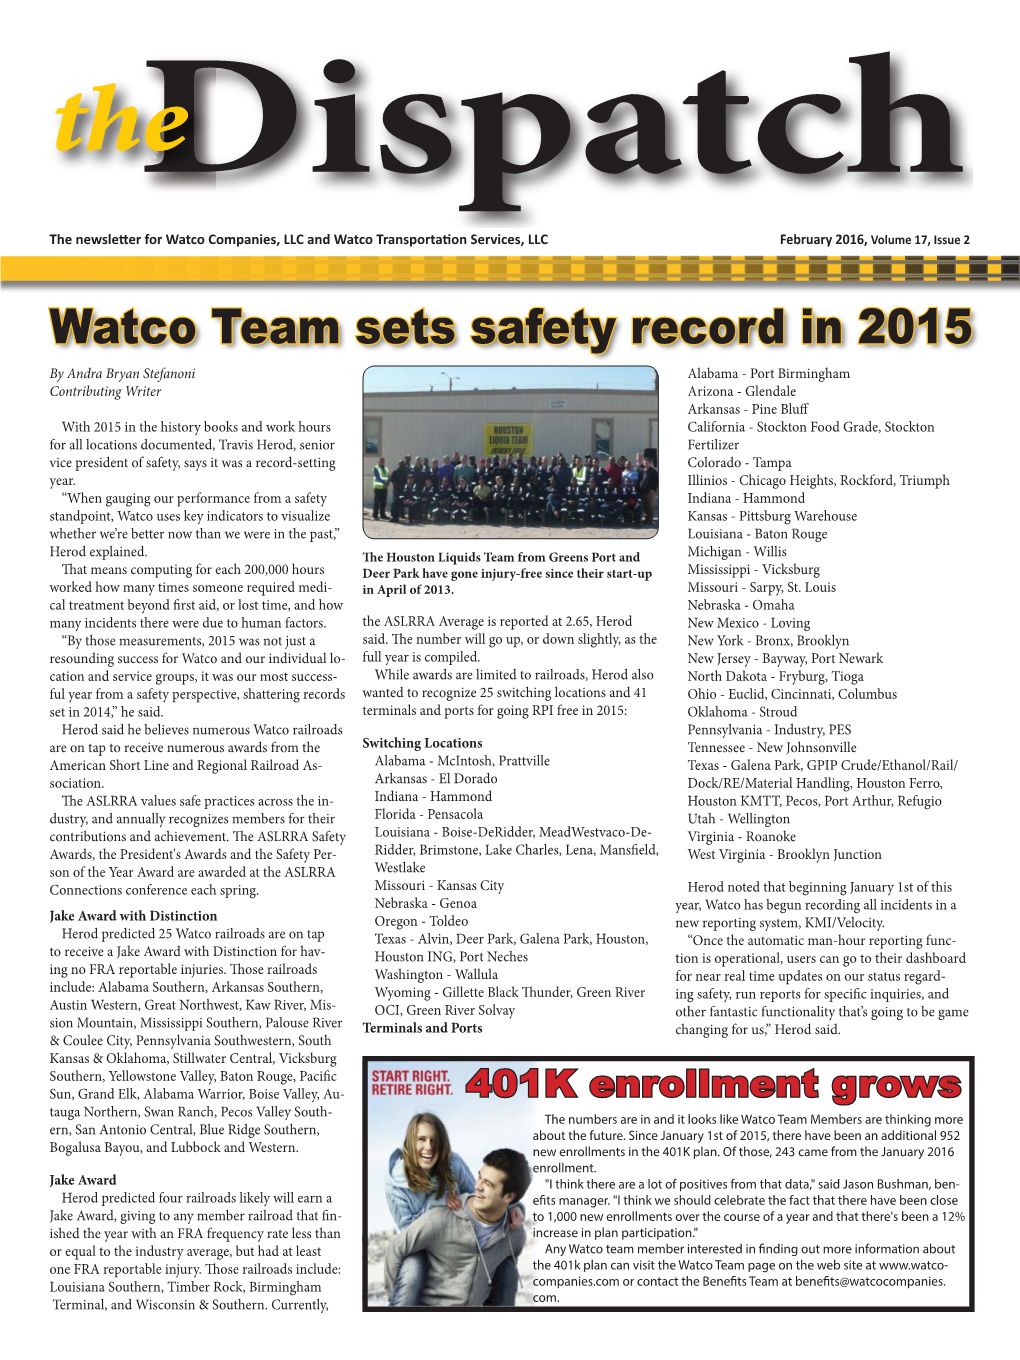 Watco Team Sets Safety Record in 2015